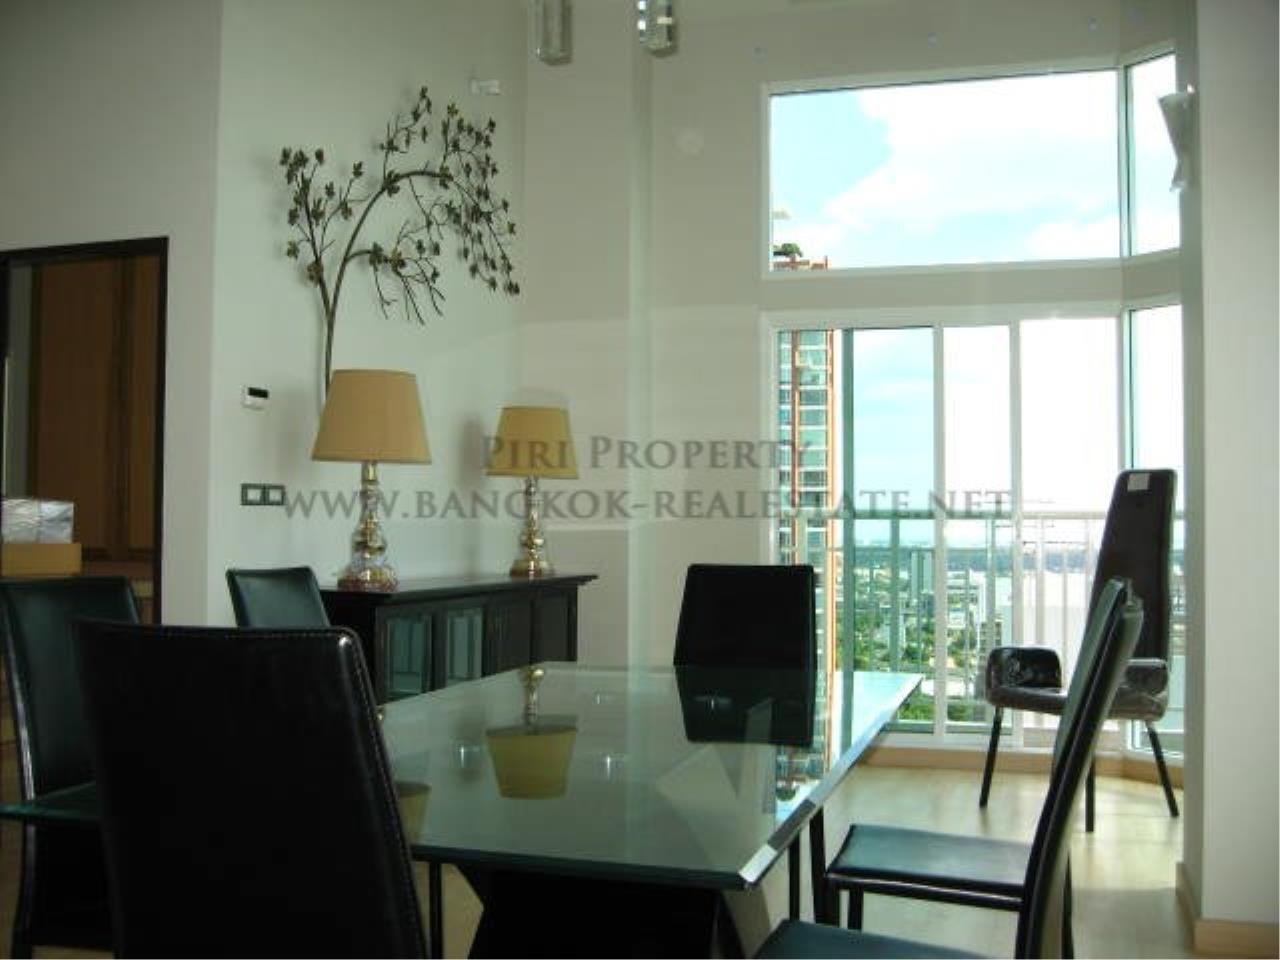 Piri Property Agency's 59 Heritage Penthouse - 3 bedroom Duplex for Sale 2